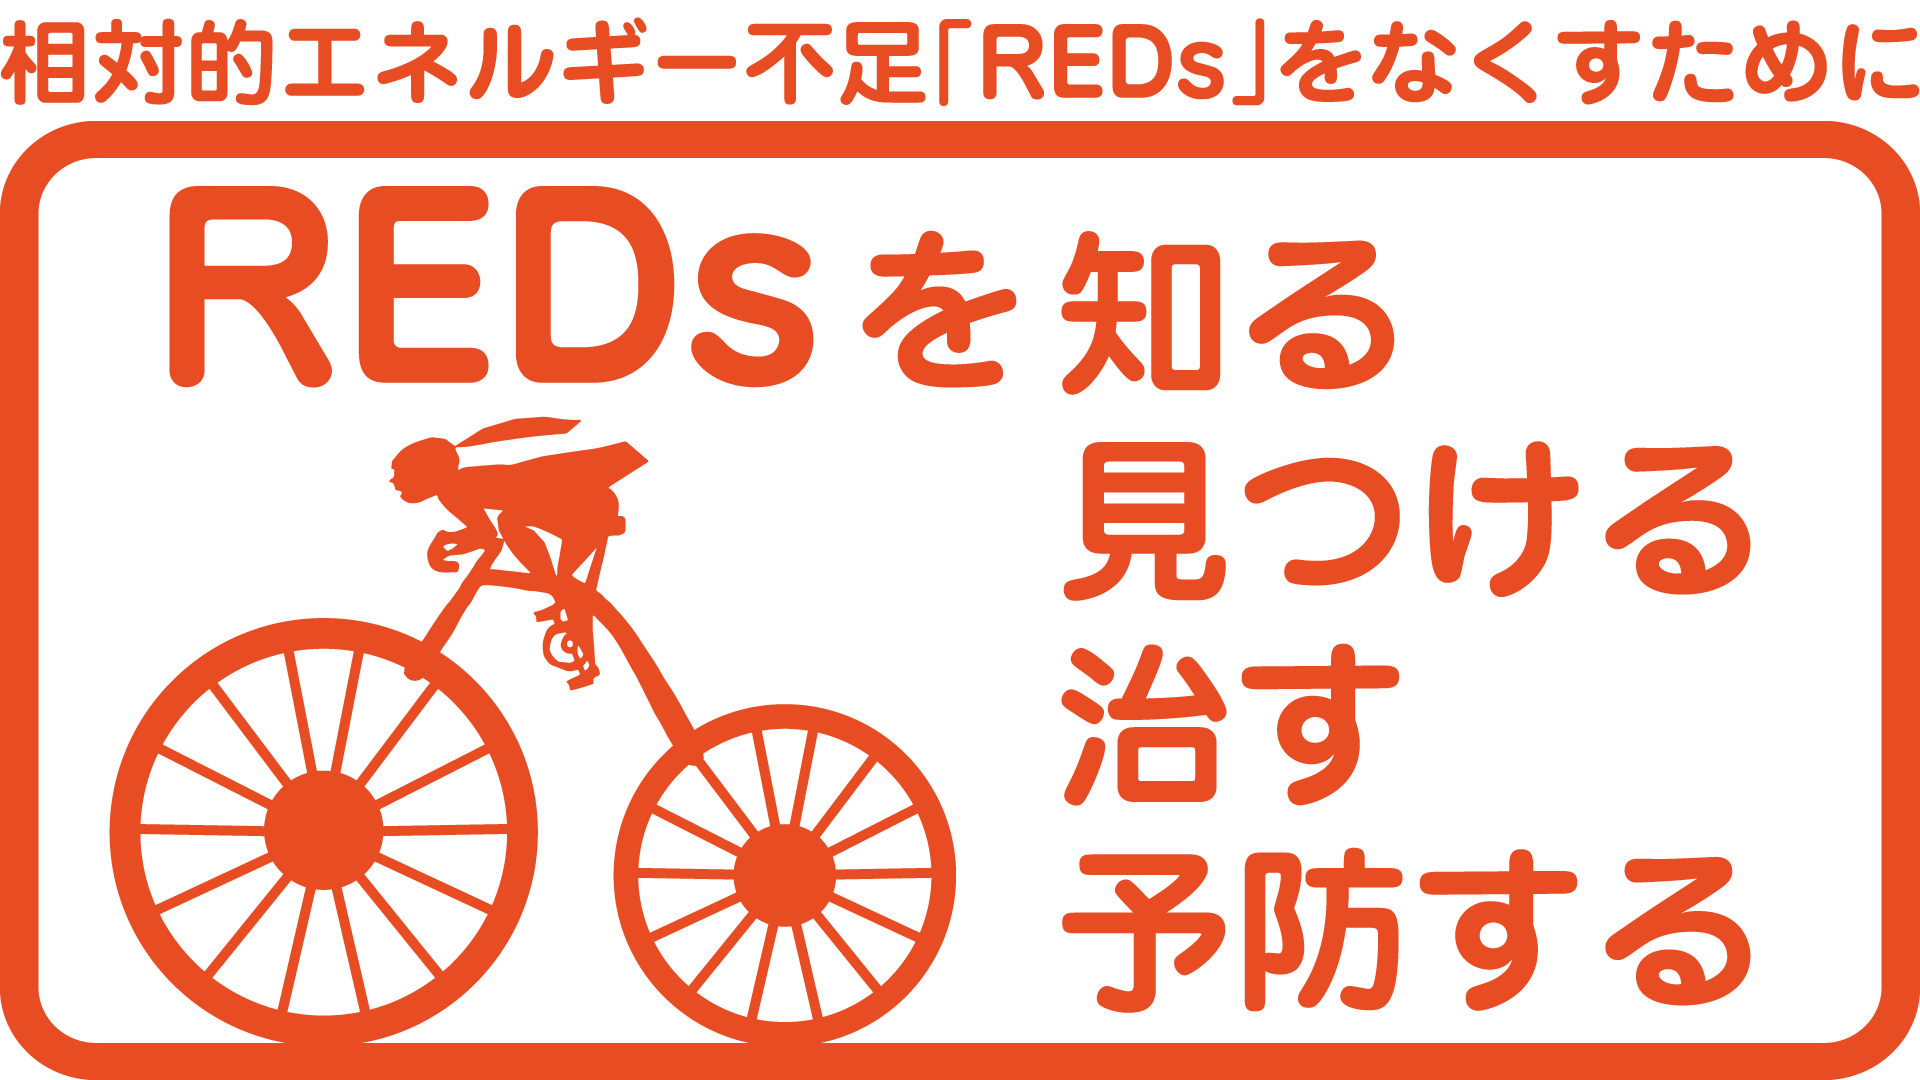 REDsーimg-1.png